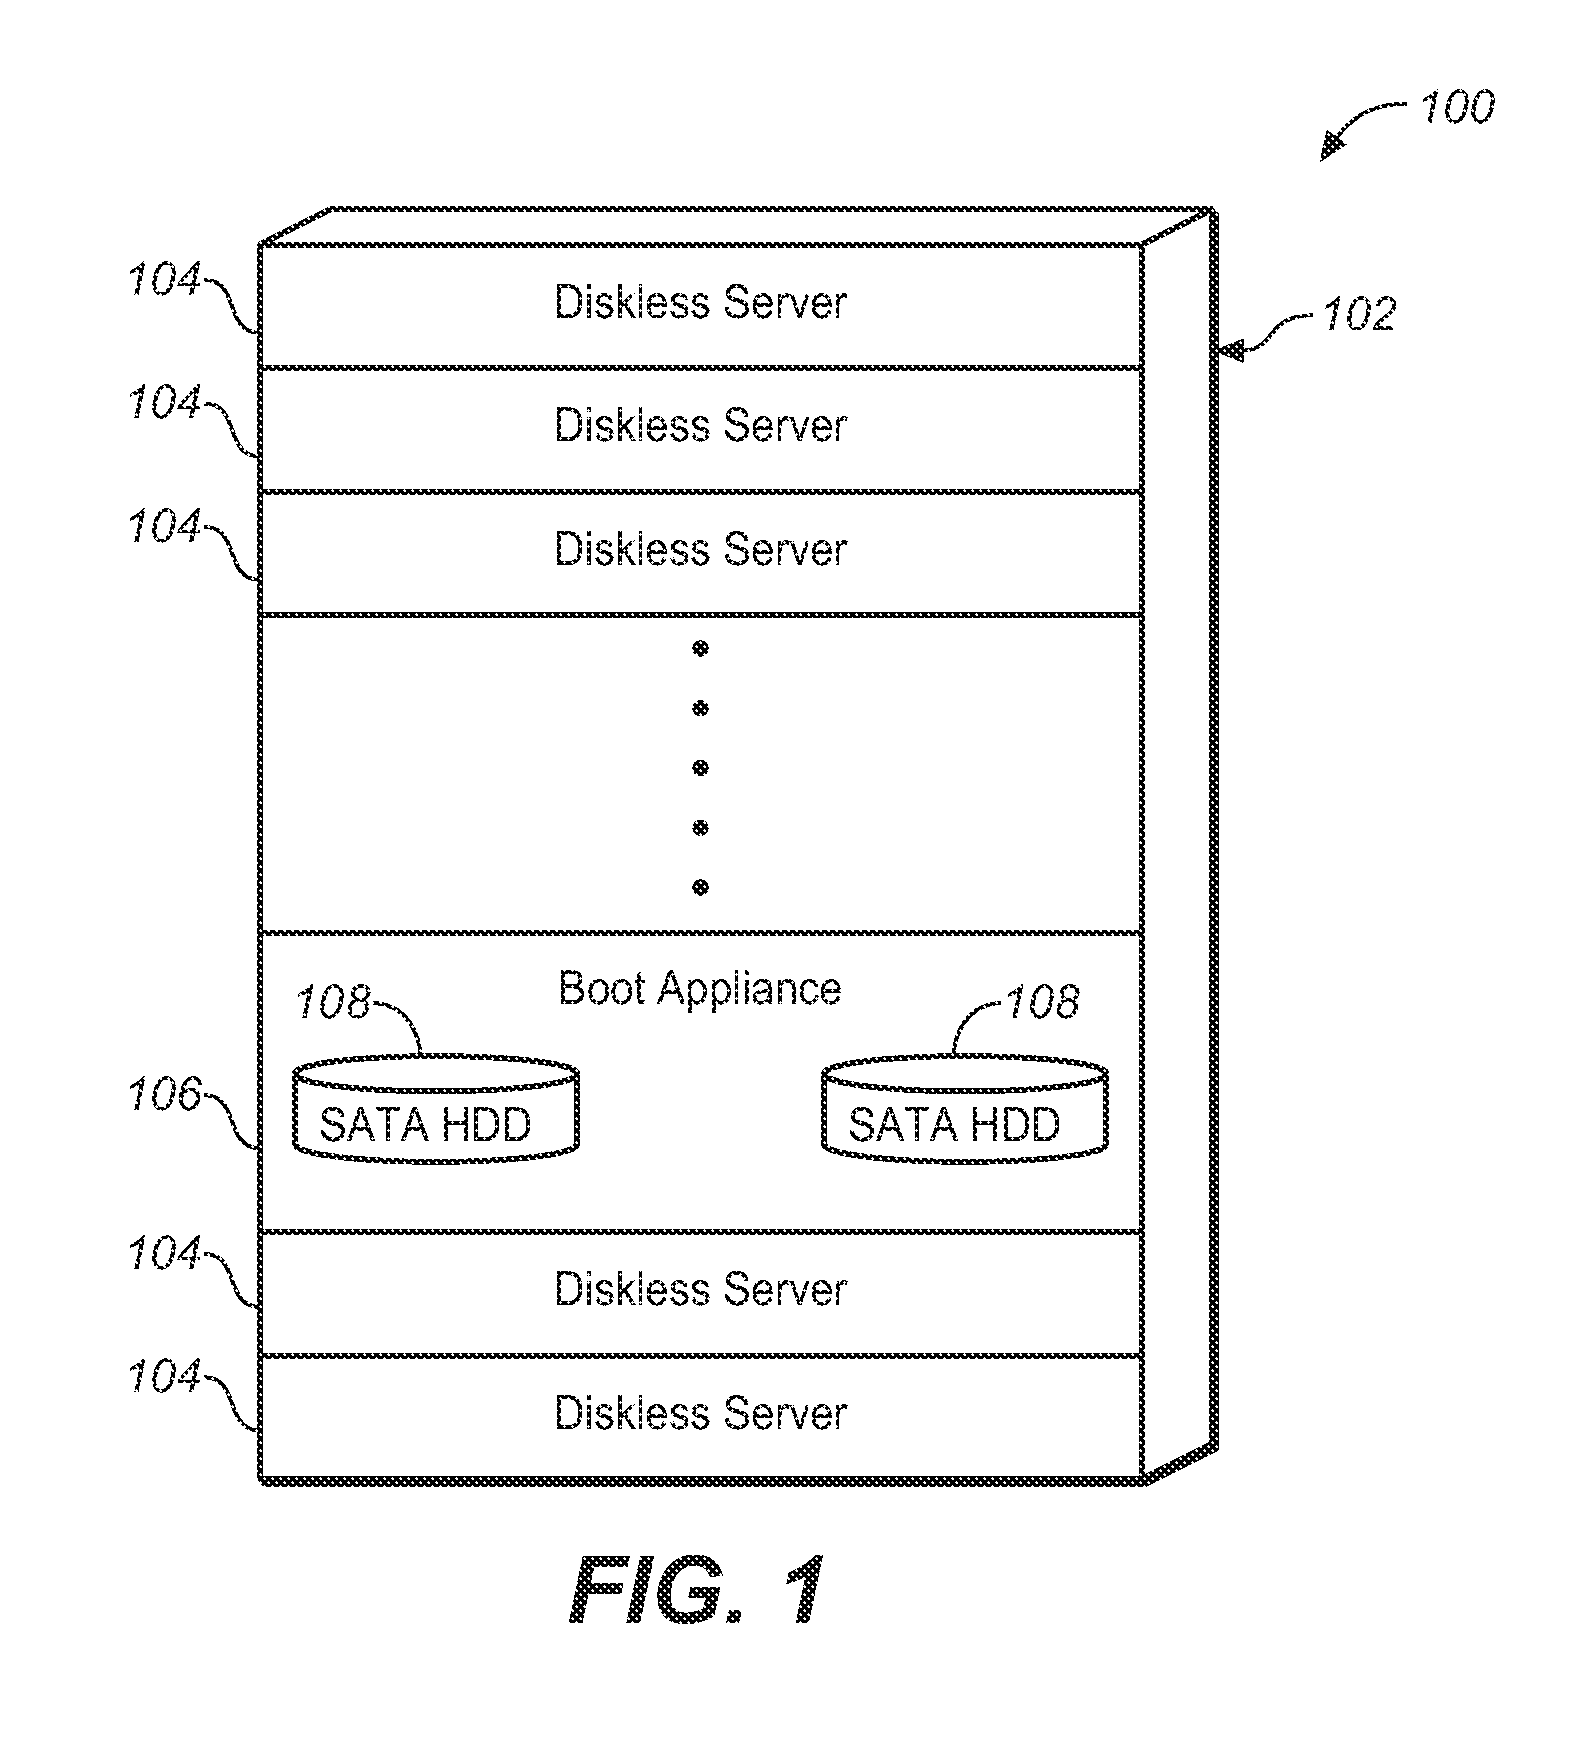 Method and apparatus for consolidating boot drives and improving reliability/availability/serviceability in high density server environments